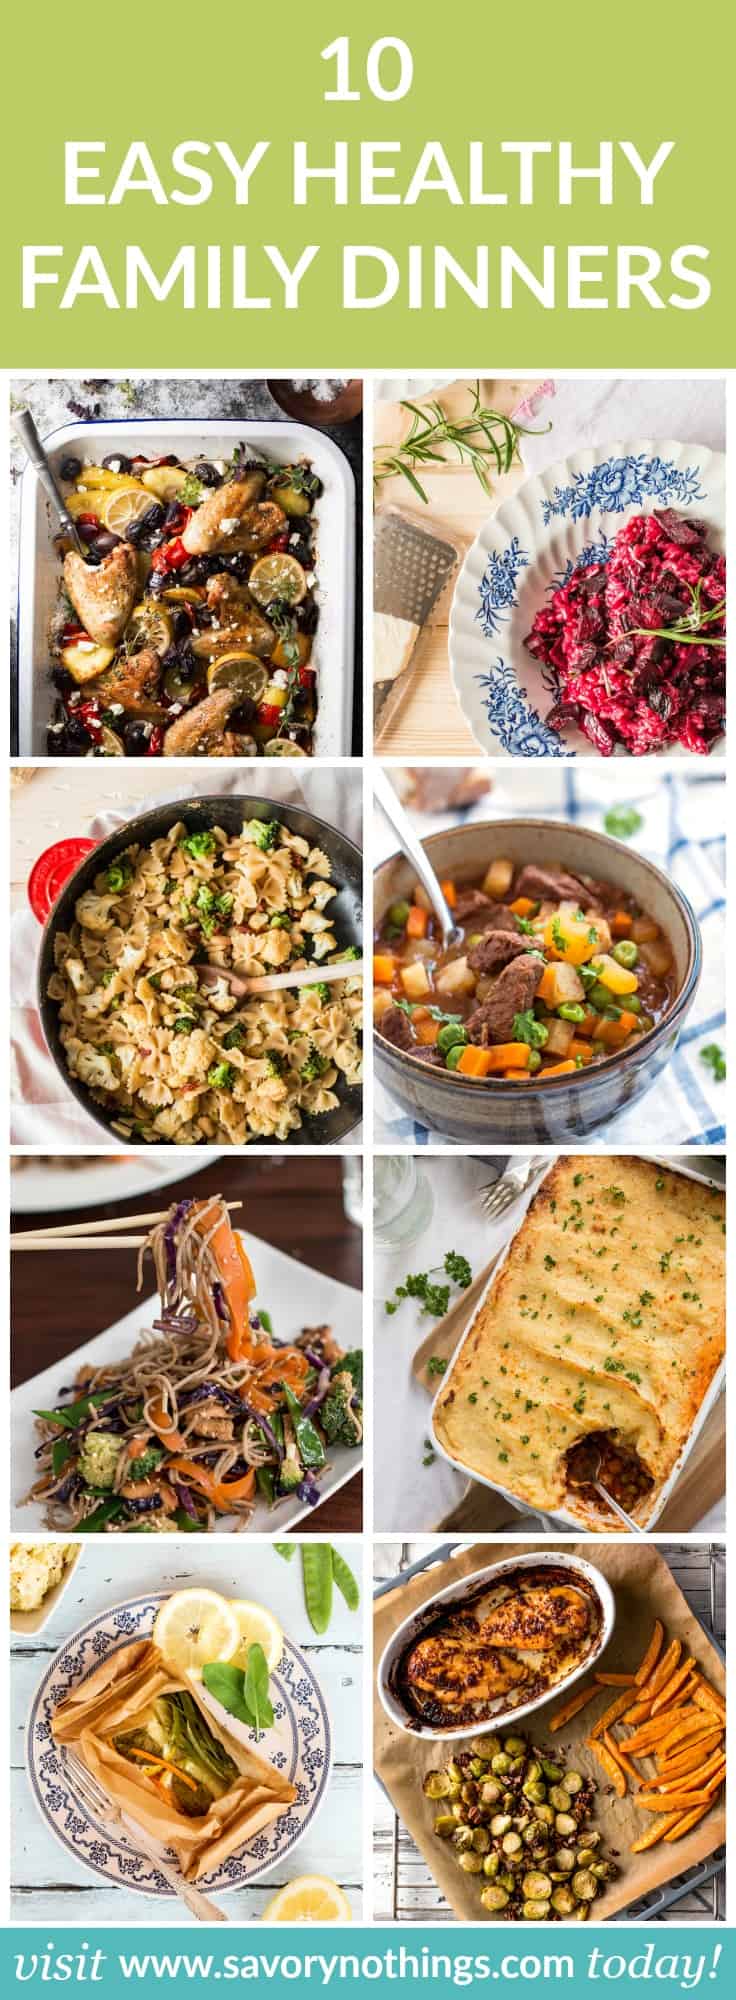 10 Healthy Family Dinners - Easy Recipes for Busy Weeknights